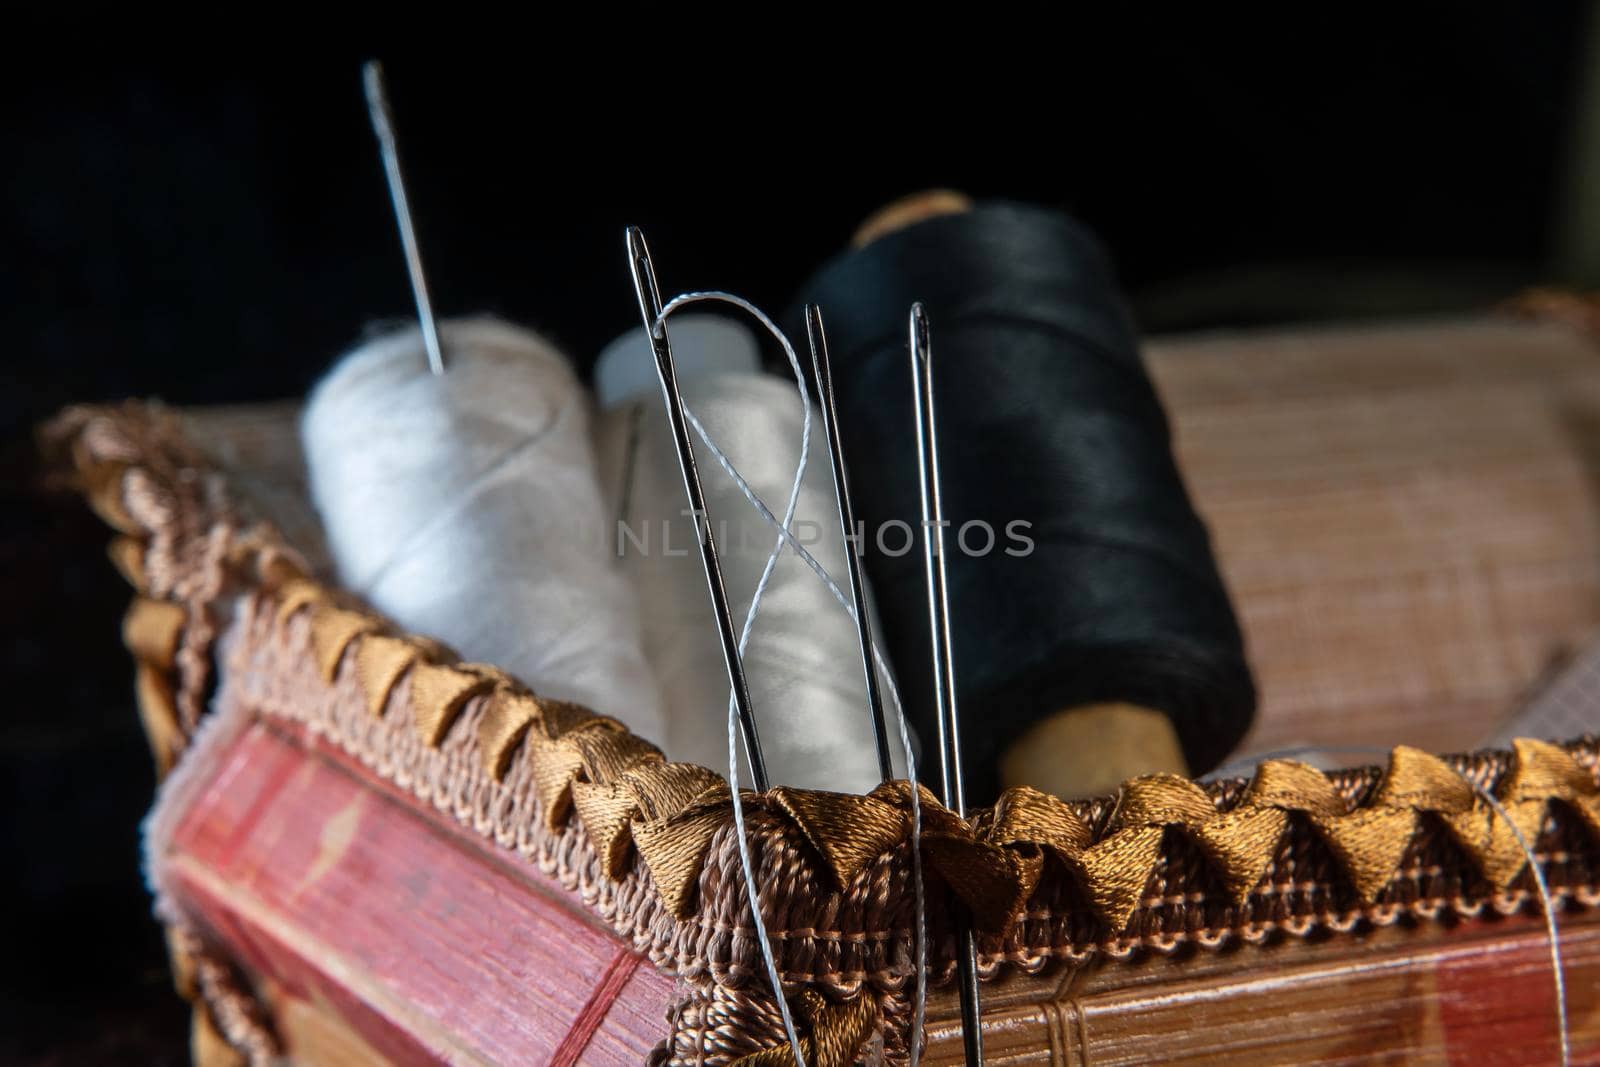 The thread is threaded through the eye of a sewing needle.Sewing and needlework classes.Workshop of hand craft and handmade.Workplace of the textile industry.The embroidery needle is stuck in a bobbin by YevgeniySam